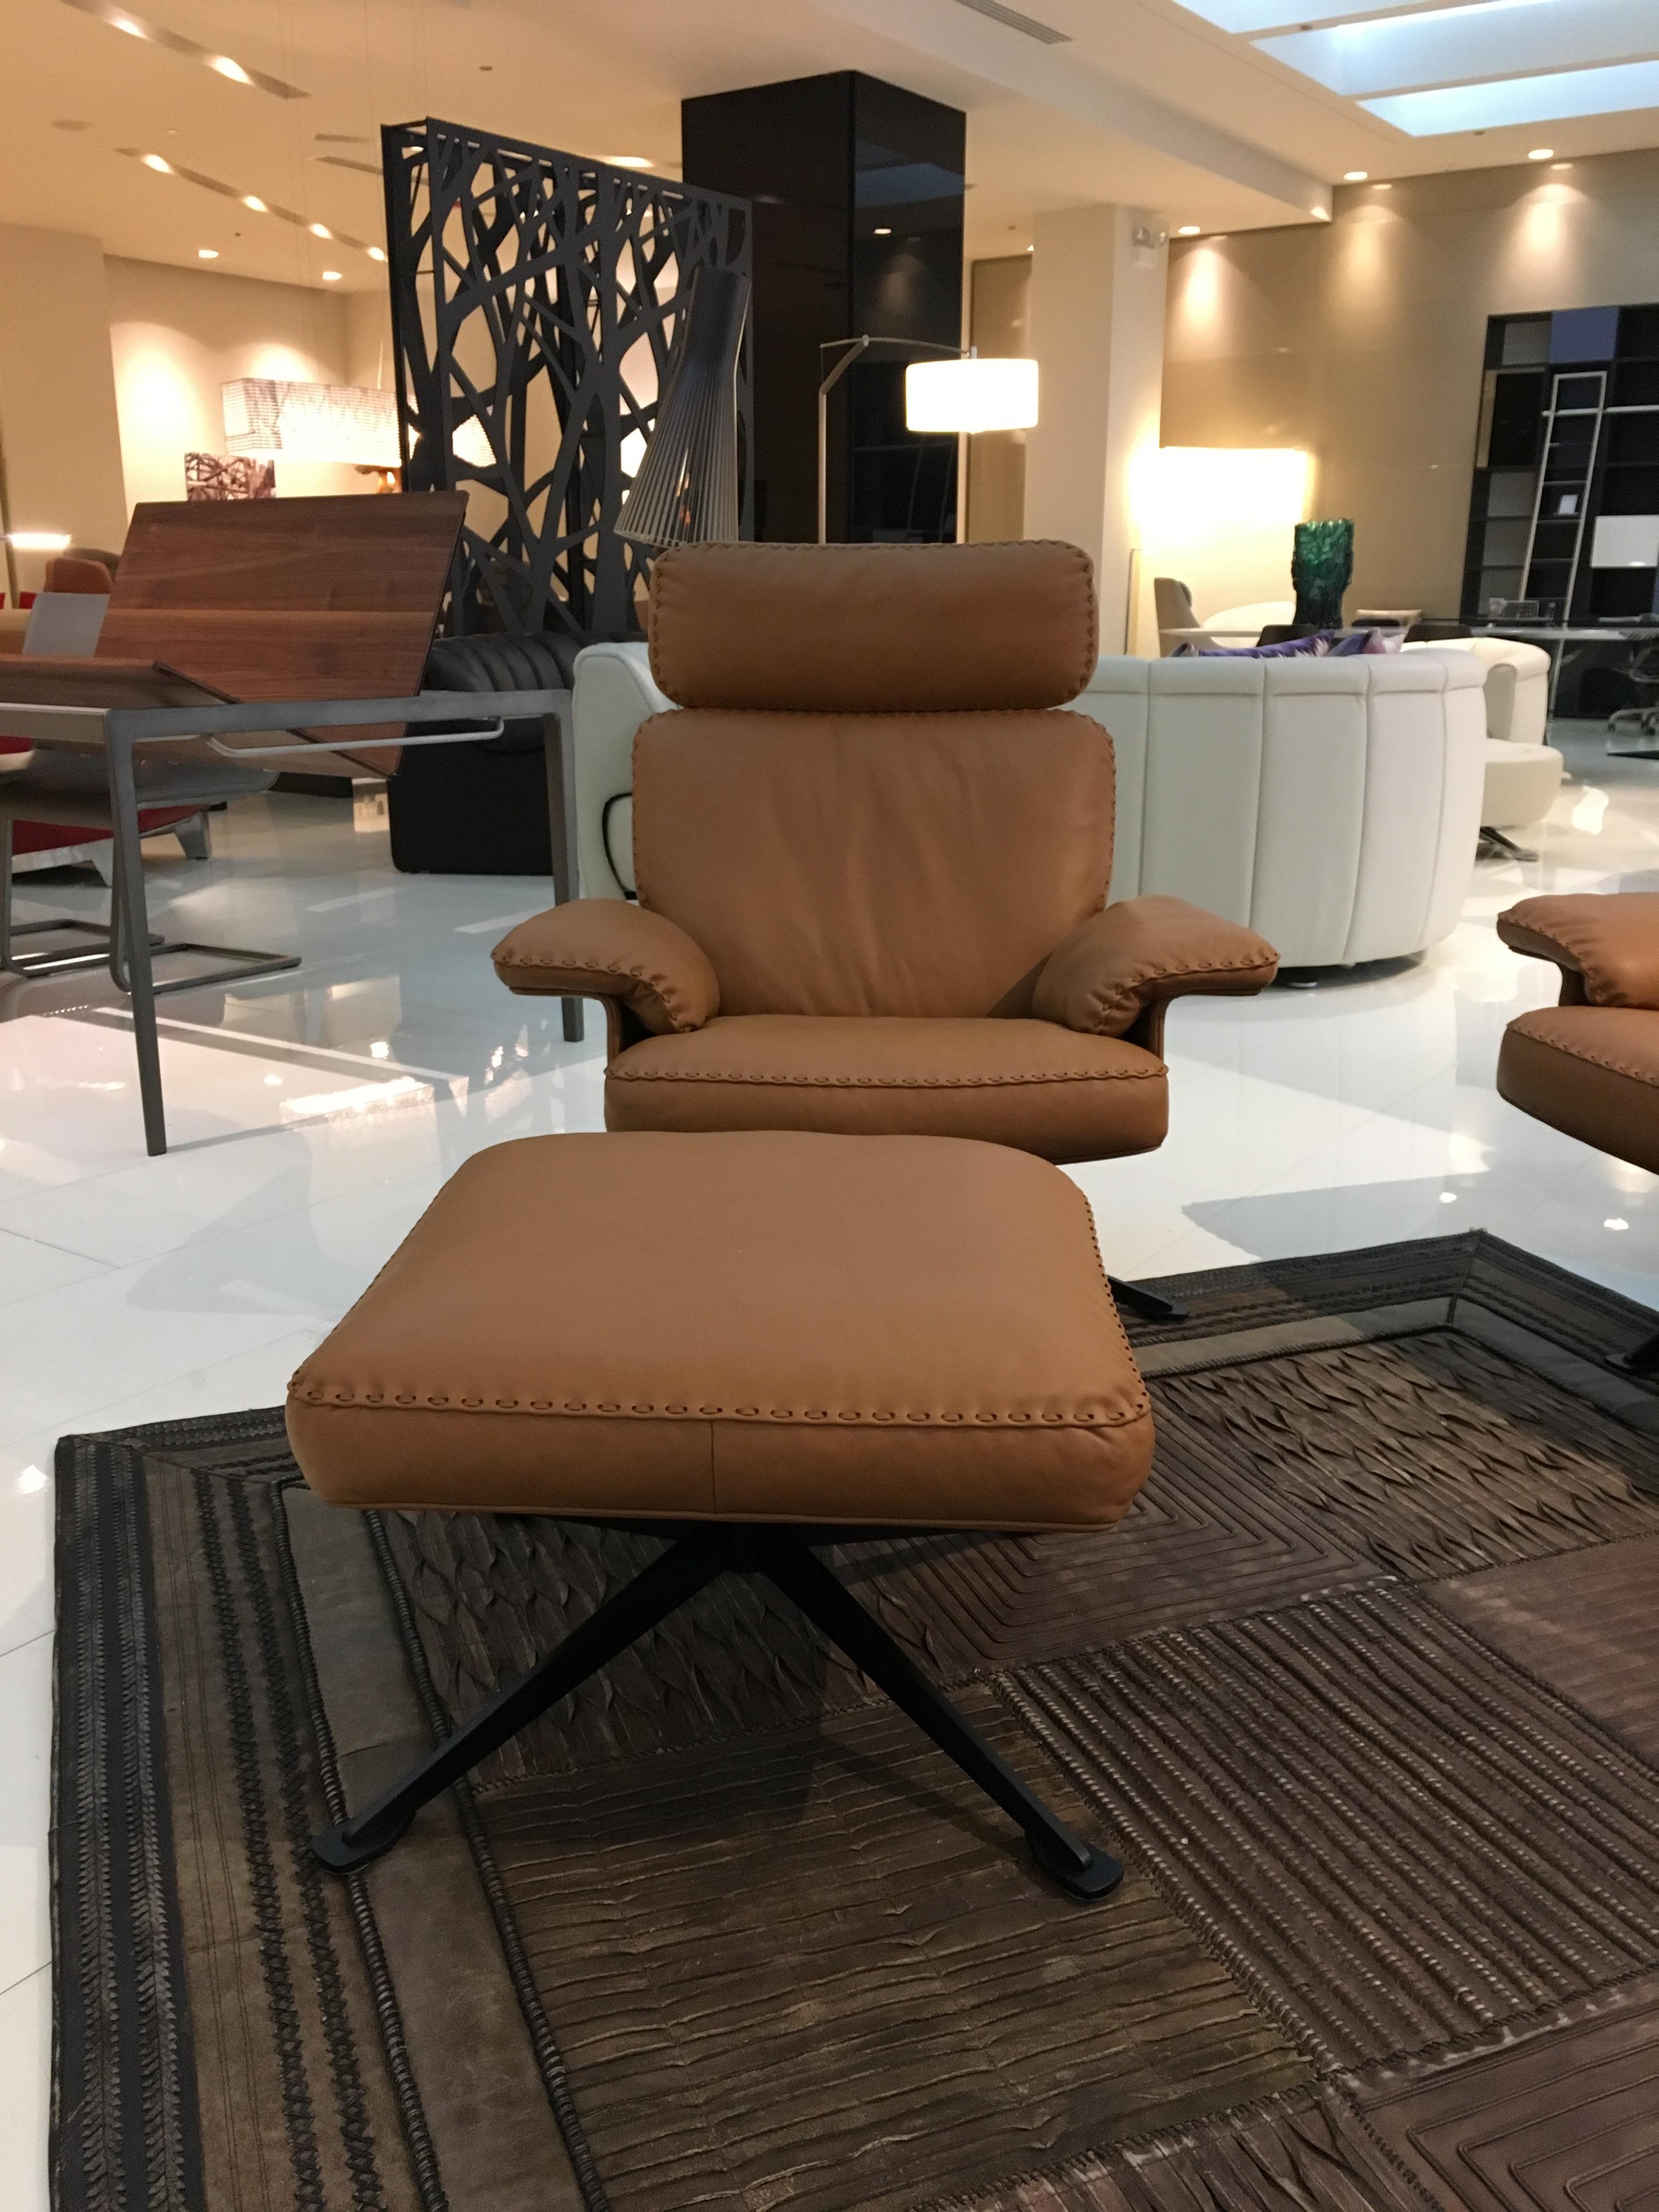 The DS-31 model series is one of the classics of our manufacture, combining design, craftsmanship and leather expertise to create a timeless, beautiful upholstered model.
The design gives a light appearance: back and seat cushions lie on a thin,